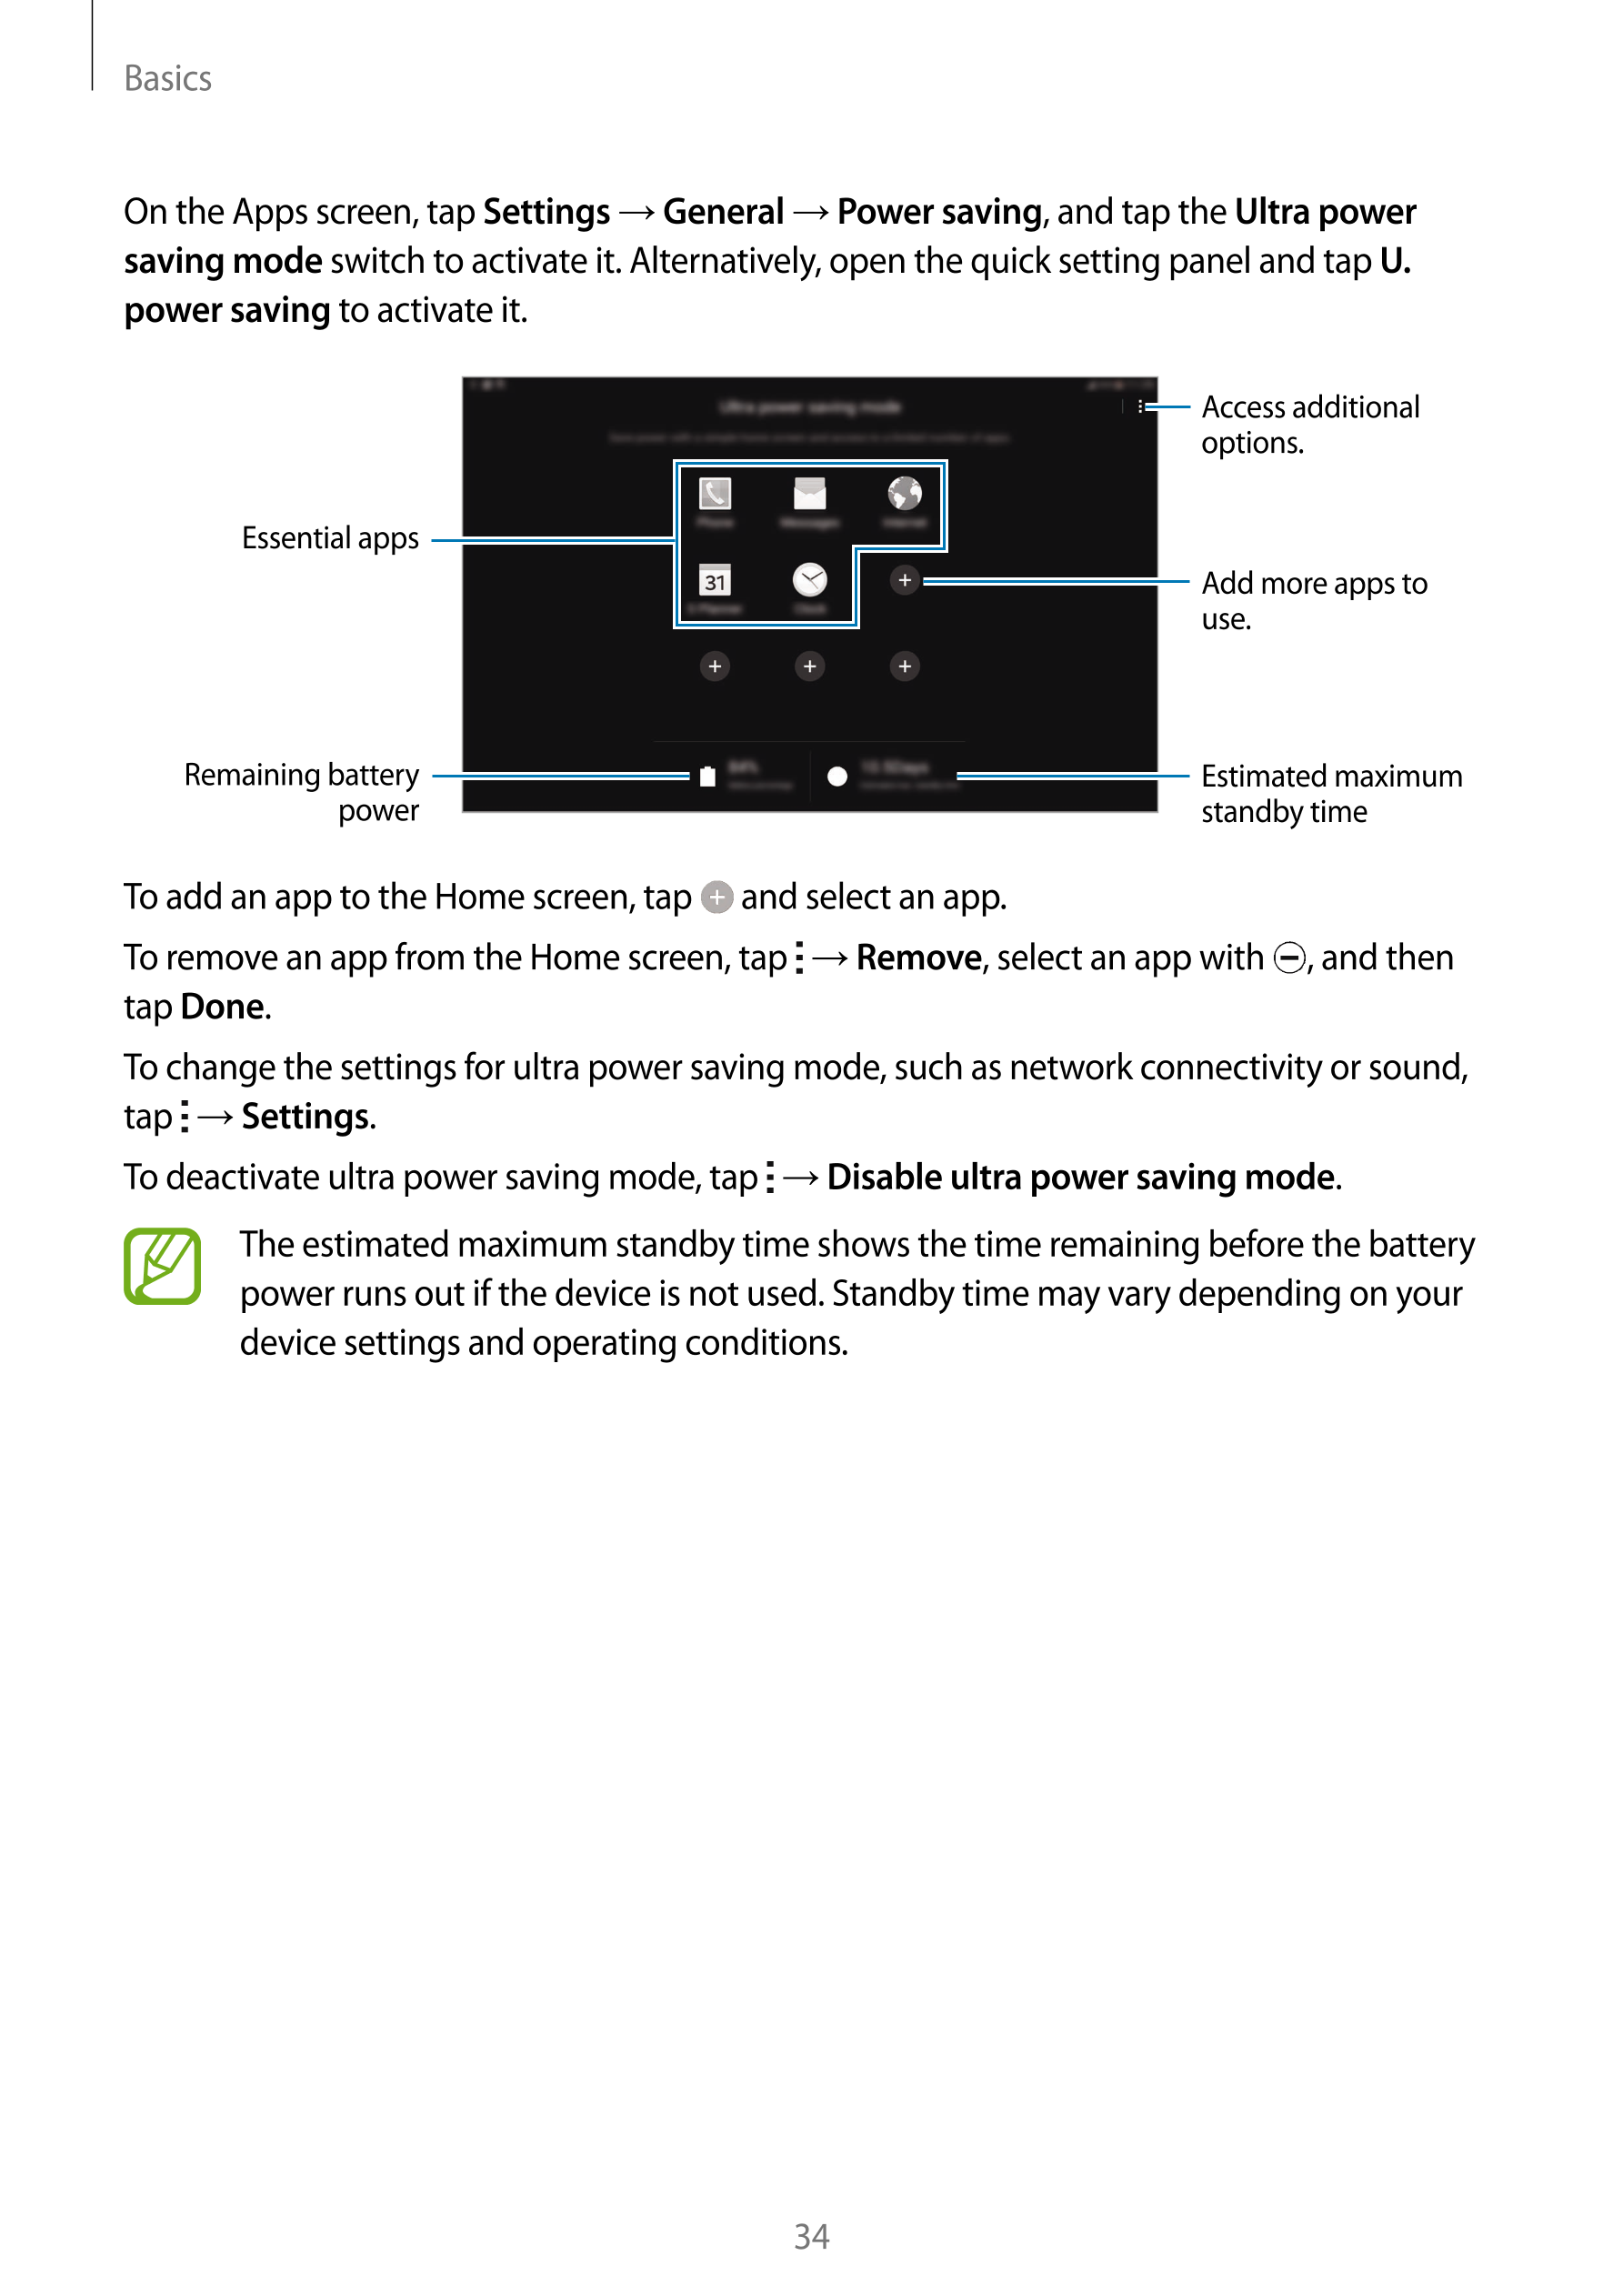 Basics
On the Apps screen, tap  Settings  →  General  →  Power saving, and tap the  Ultra power 
saving mode switch to activate 